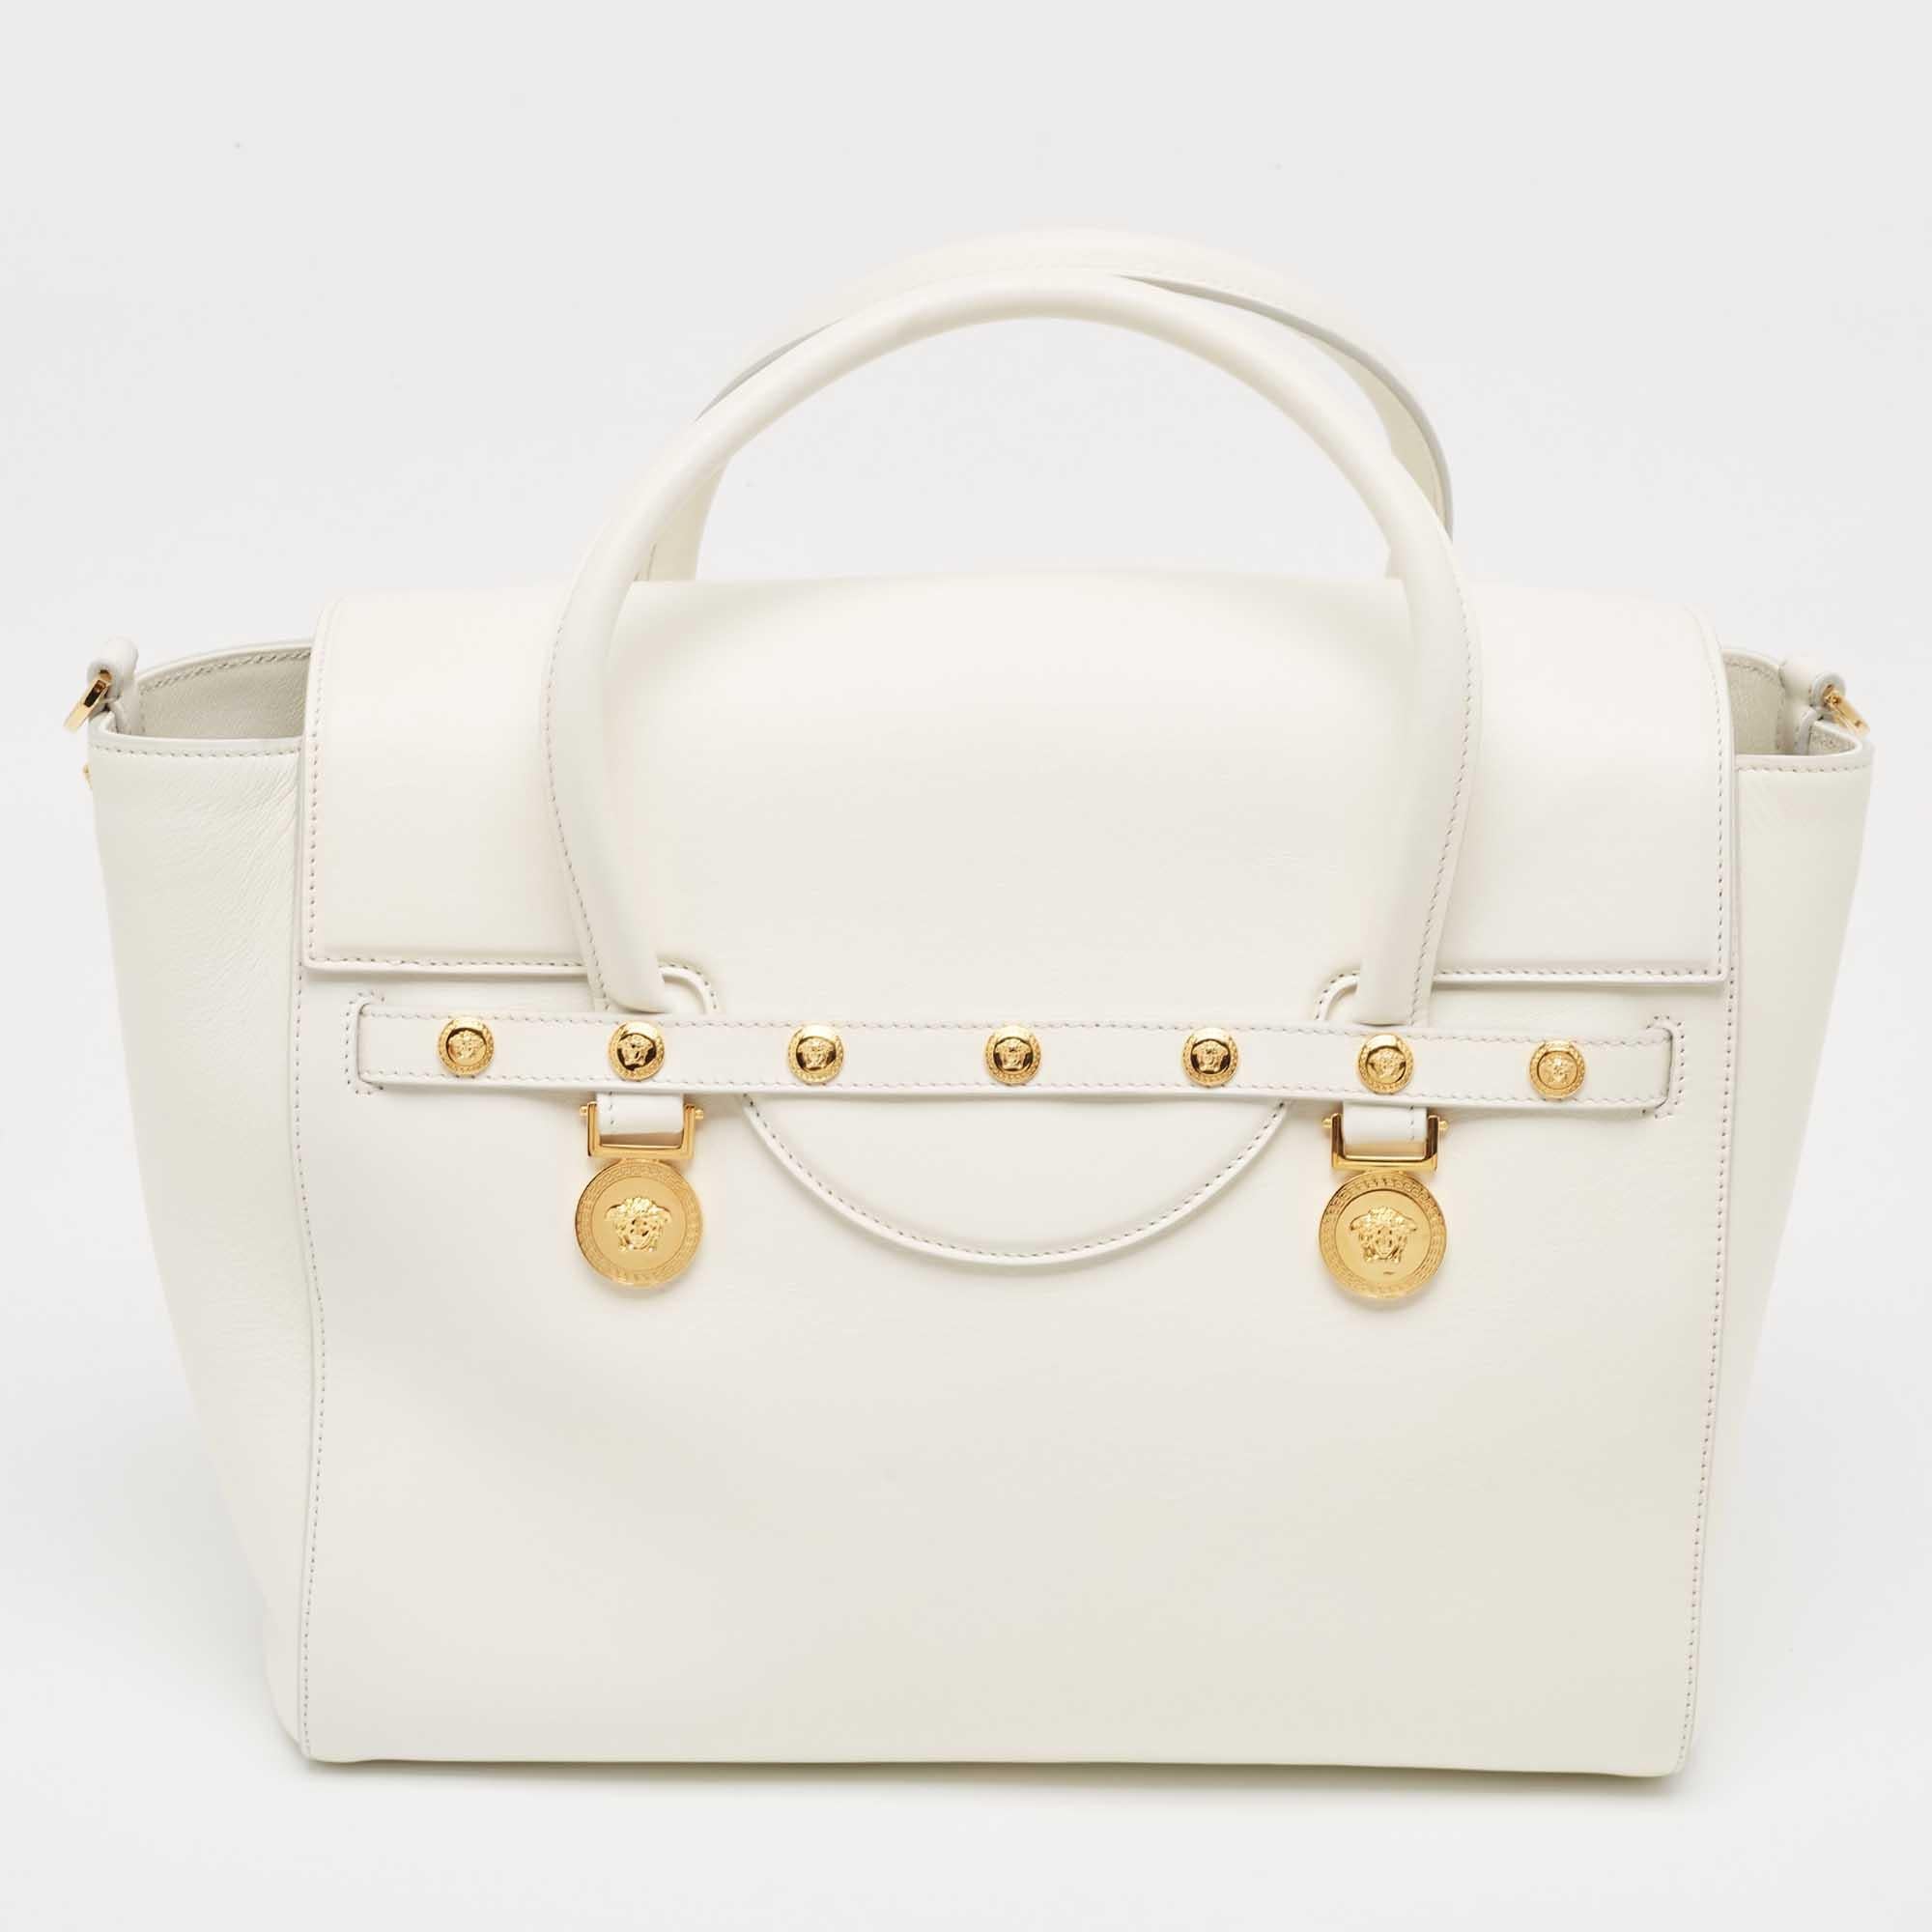 Know to create stylish, sophisticated, and timeless designs, this is a brand worth investing in. The bags that come from this label's atelier are exquisite. This Versace tote bag is no different. It has been made from quality materials and comes